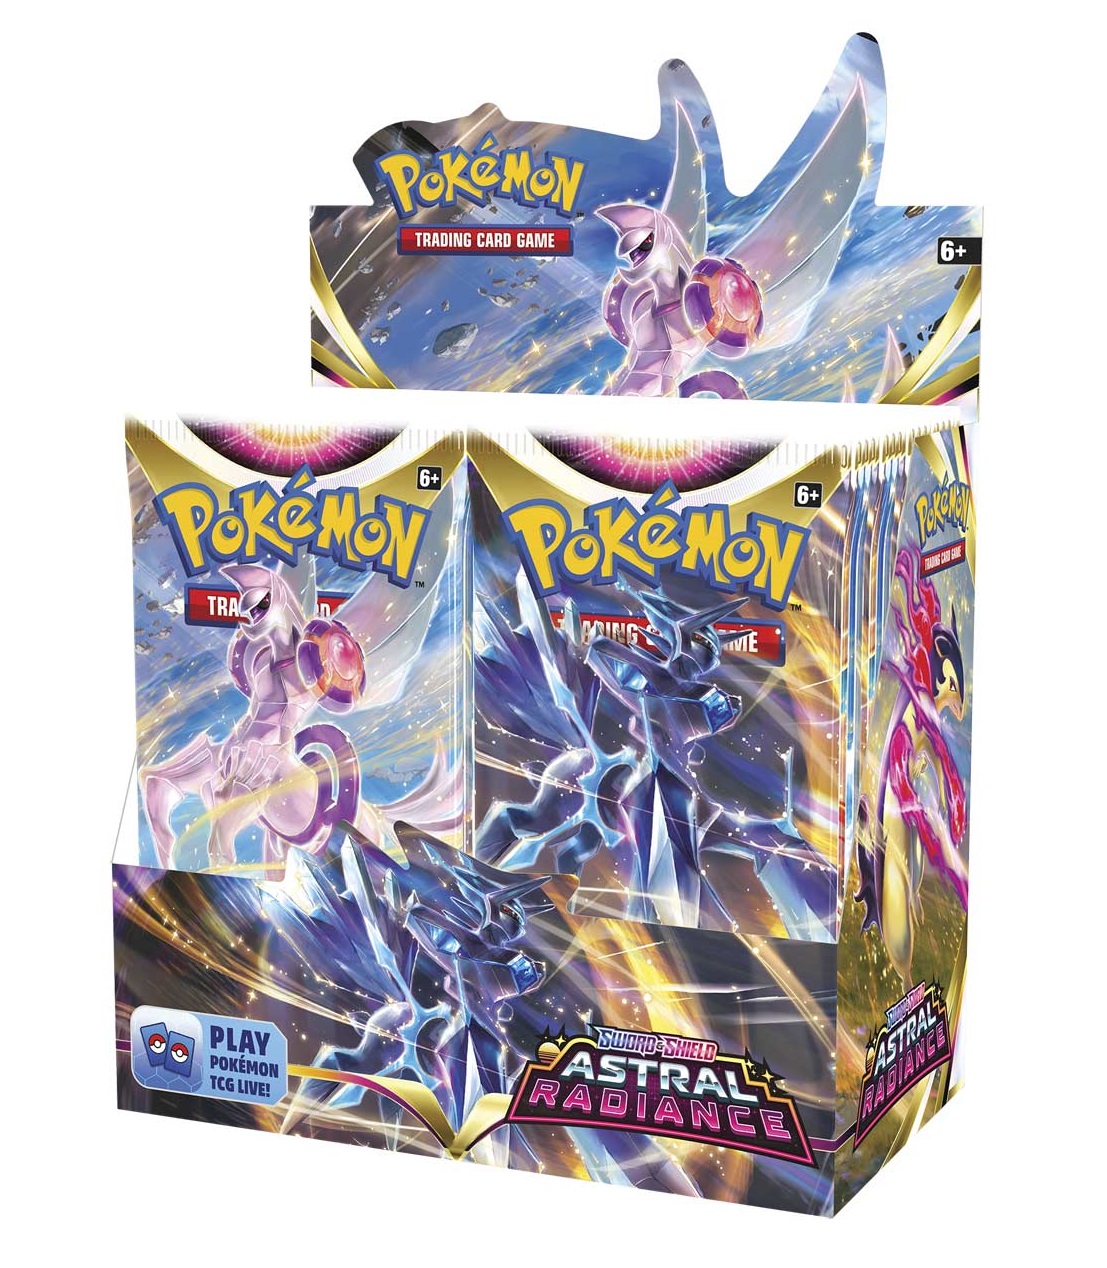 Pokemon Sword & Shied - Astral Radiance Booster Box